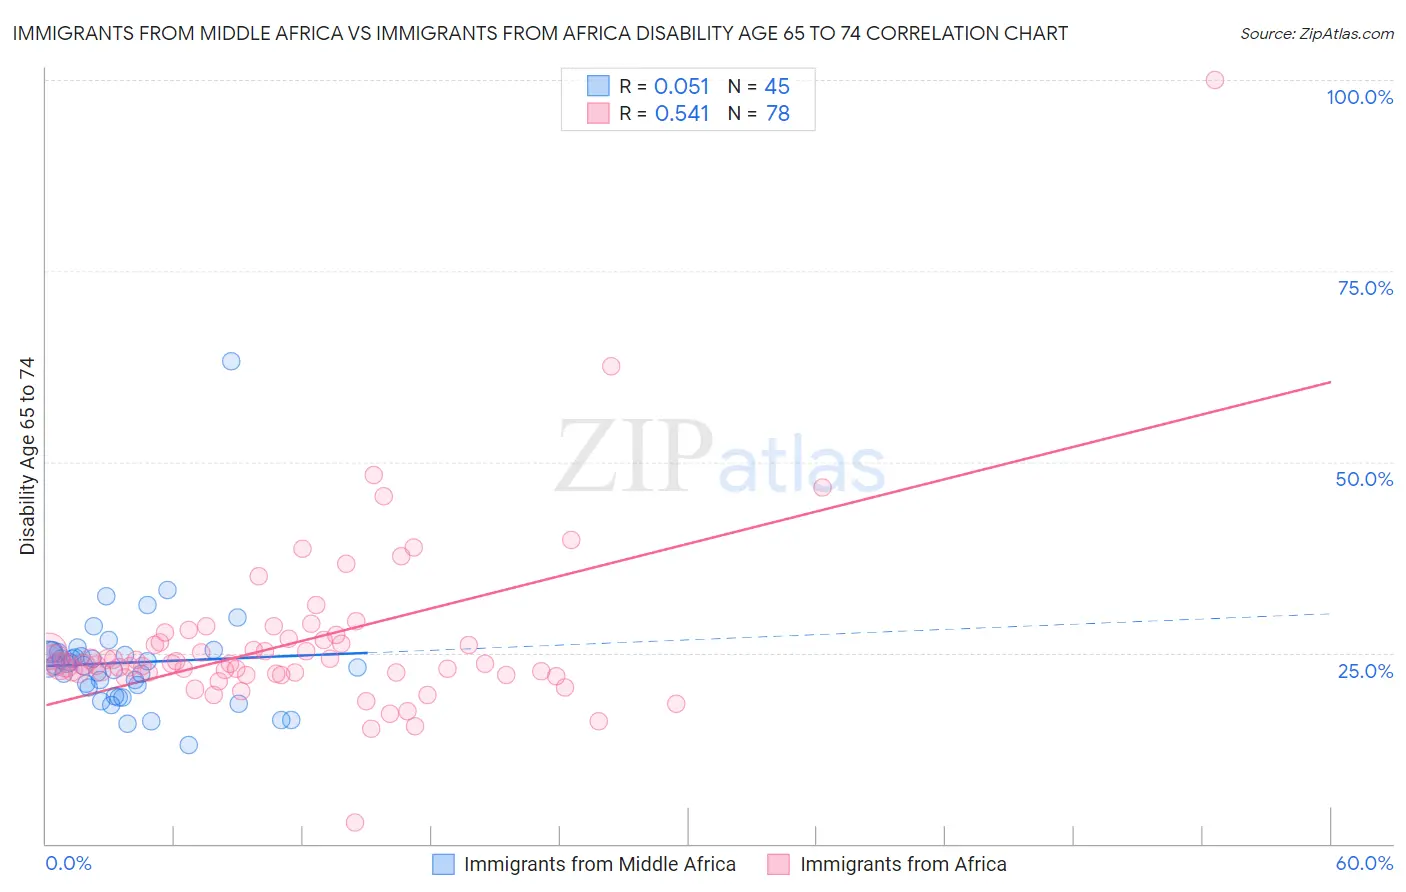 Immigrants from Middle Africa vs Immigrants from Africa Disability Age 65 to 74